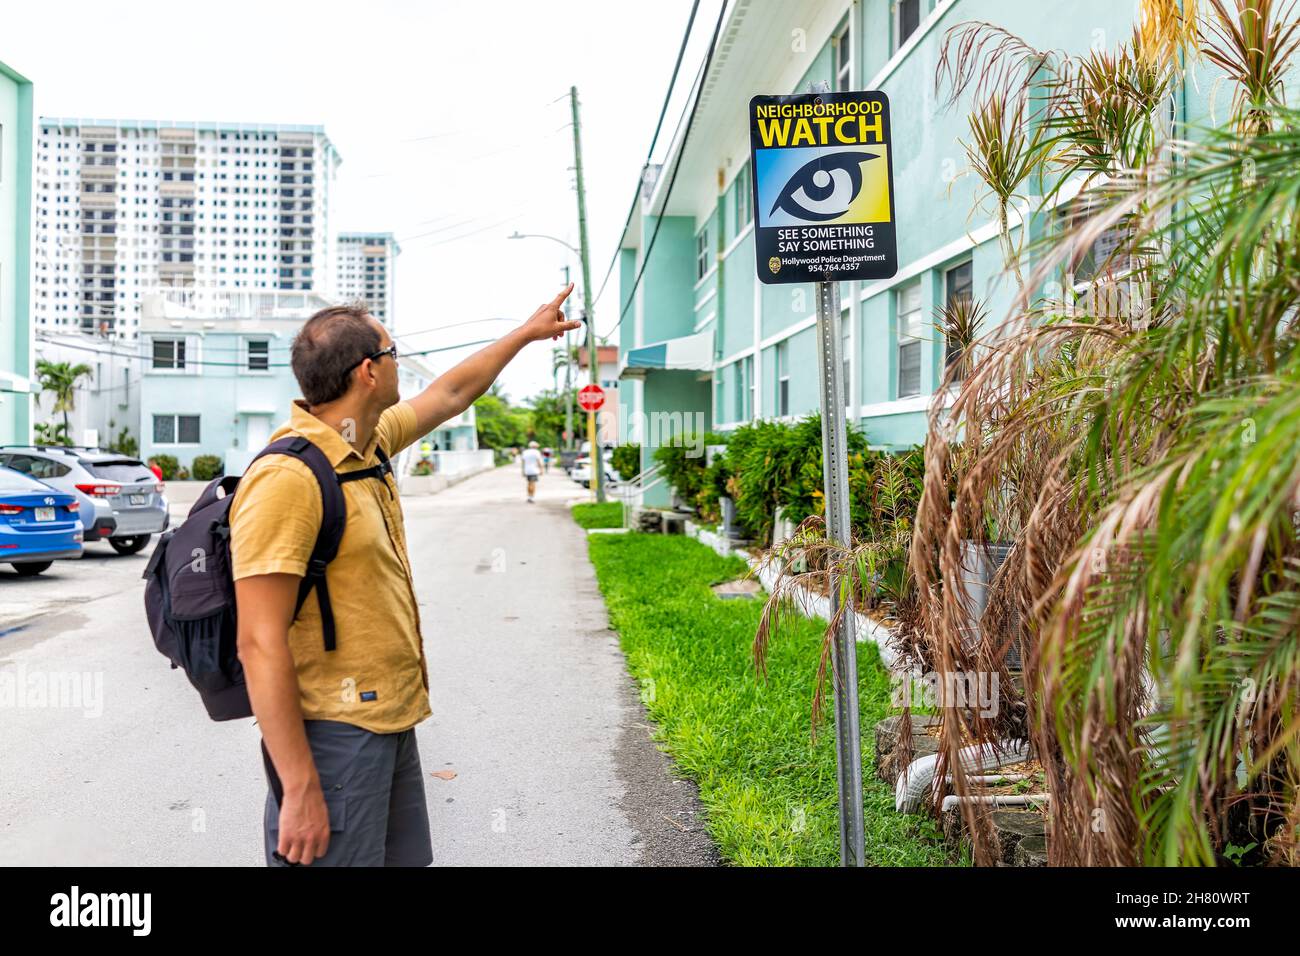 Hollywood, USA - August 4, 2021: North Miami, Hollywood beach, Florida residential district near broadwalk and beachfront building with man pointing a Stock Photo